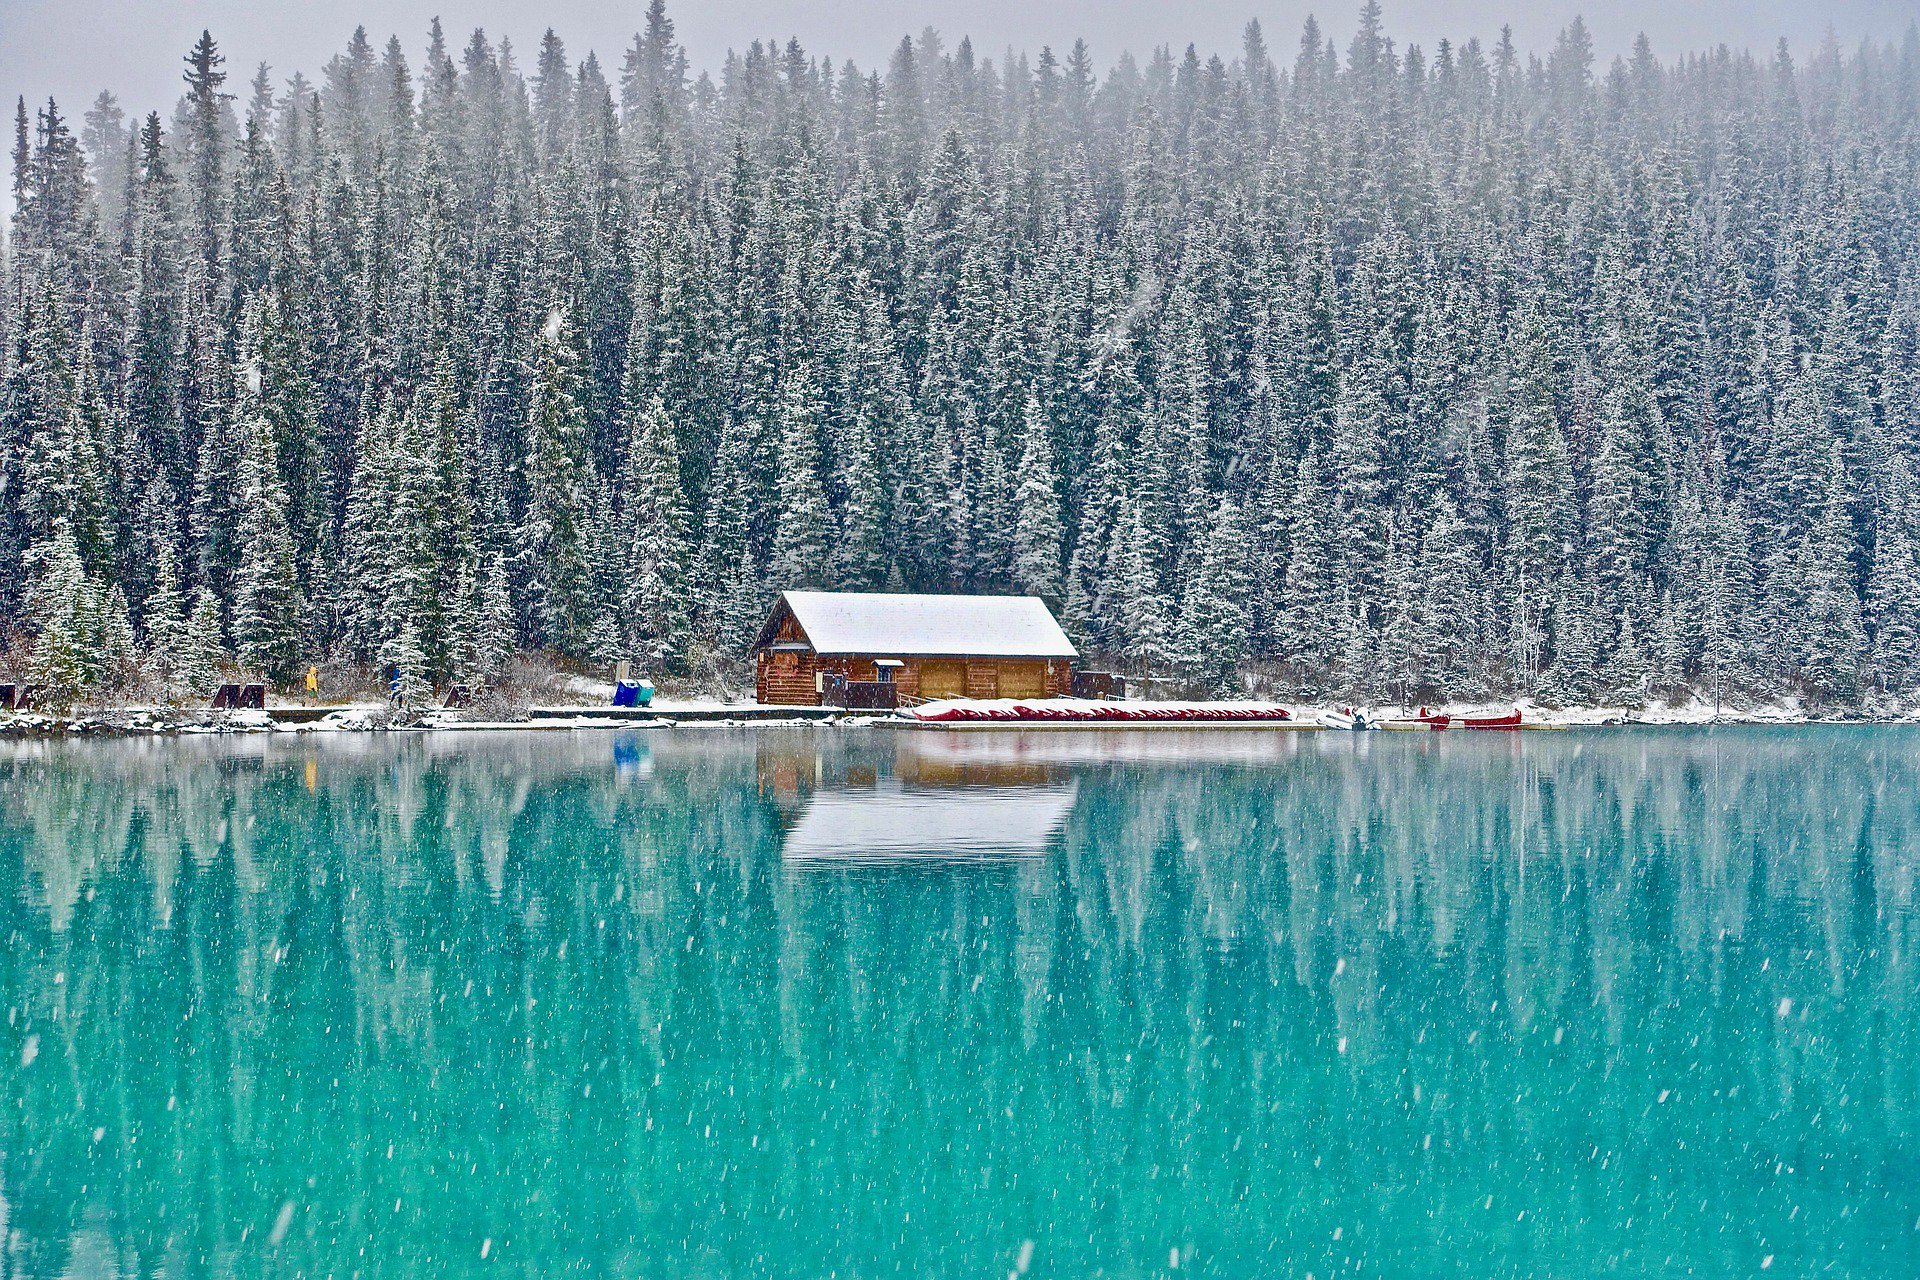 wooden, turquoise, man made, cabin, forest, lake, reflection, snow, winter UHD